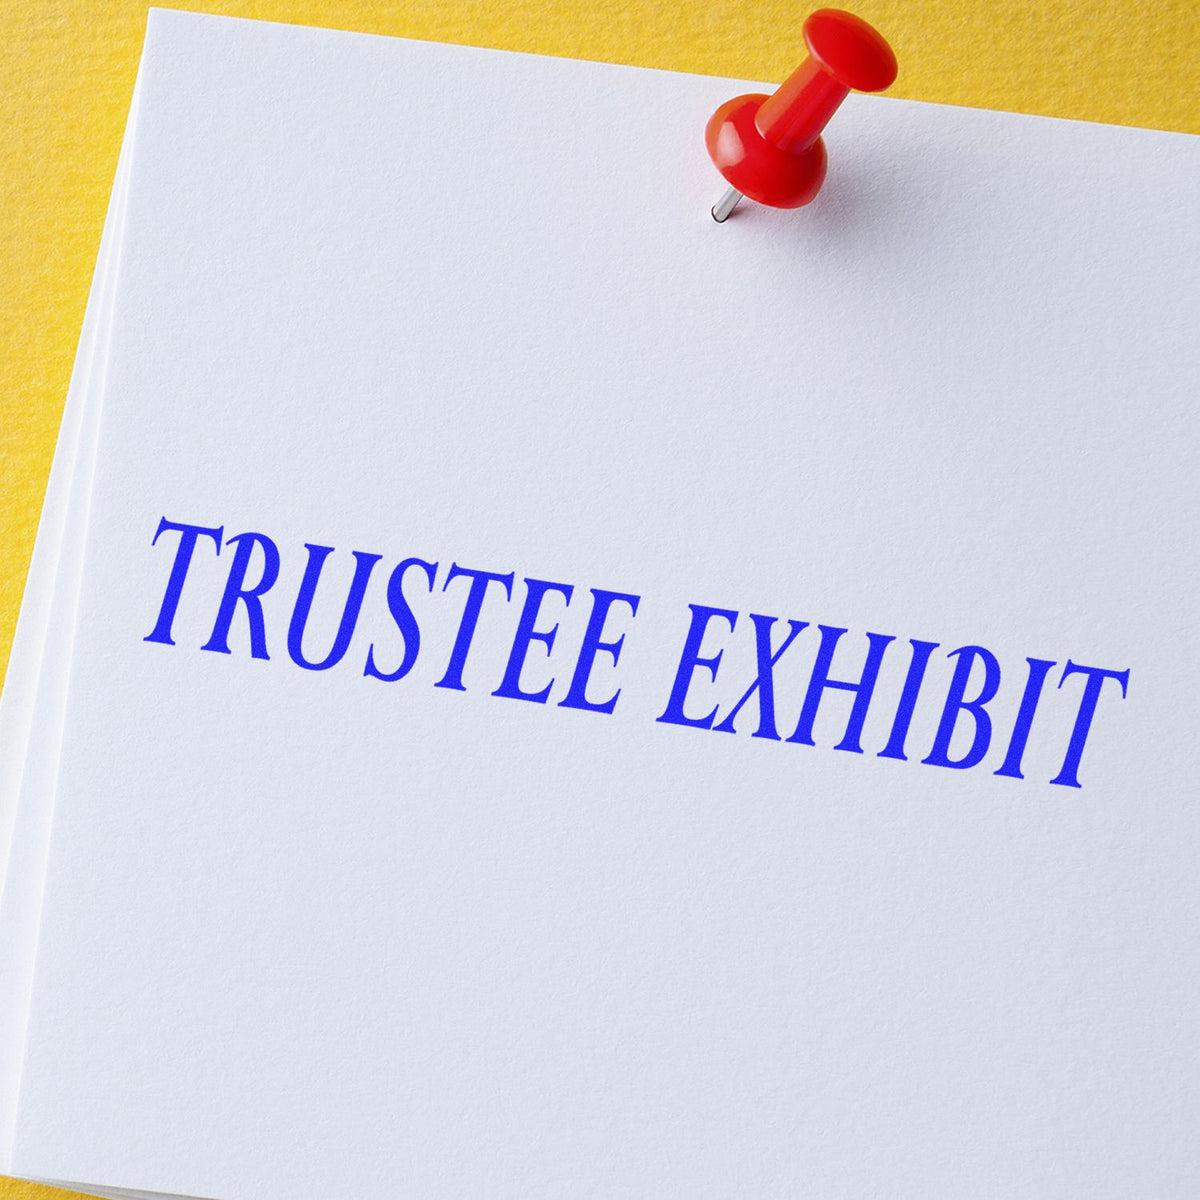 Large Pre-Inked Trustee Exhibit Stamp In Use Photo